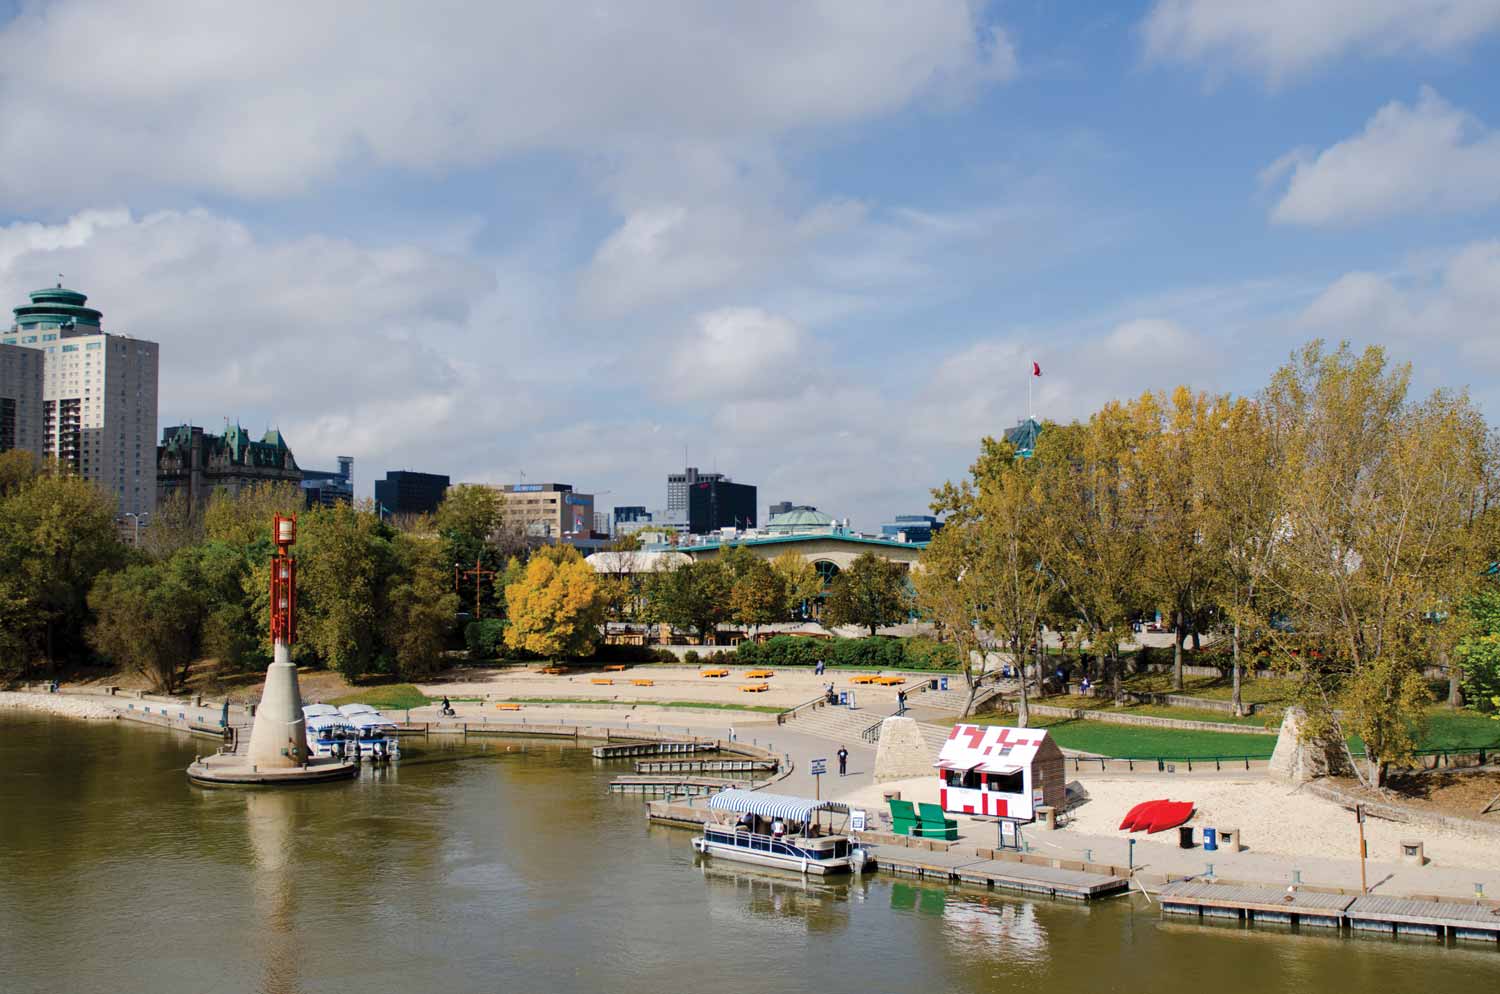 A view from the water at the Forks Historic Port. A few boats are on the water. Yellow benches are scattered along the dock. The Forks Market is in the back.